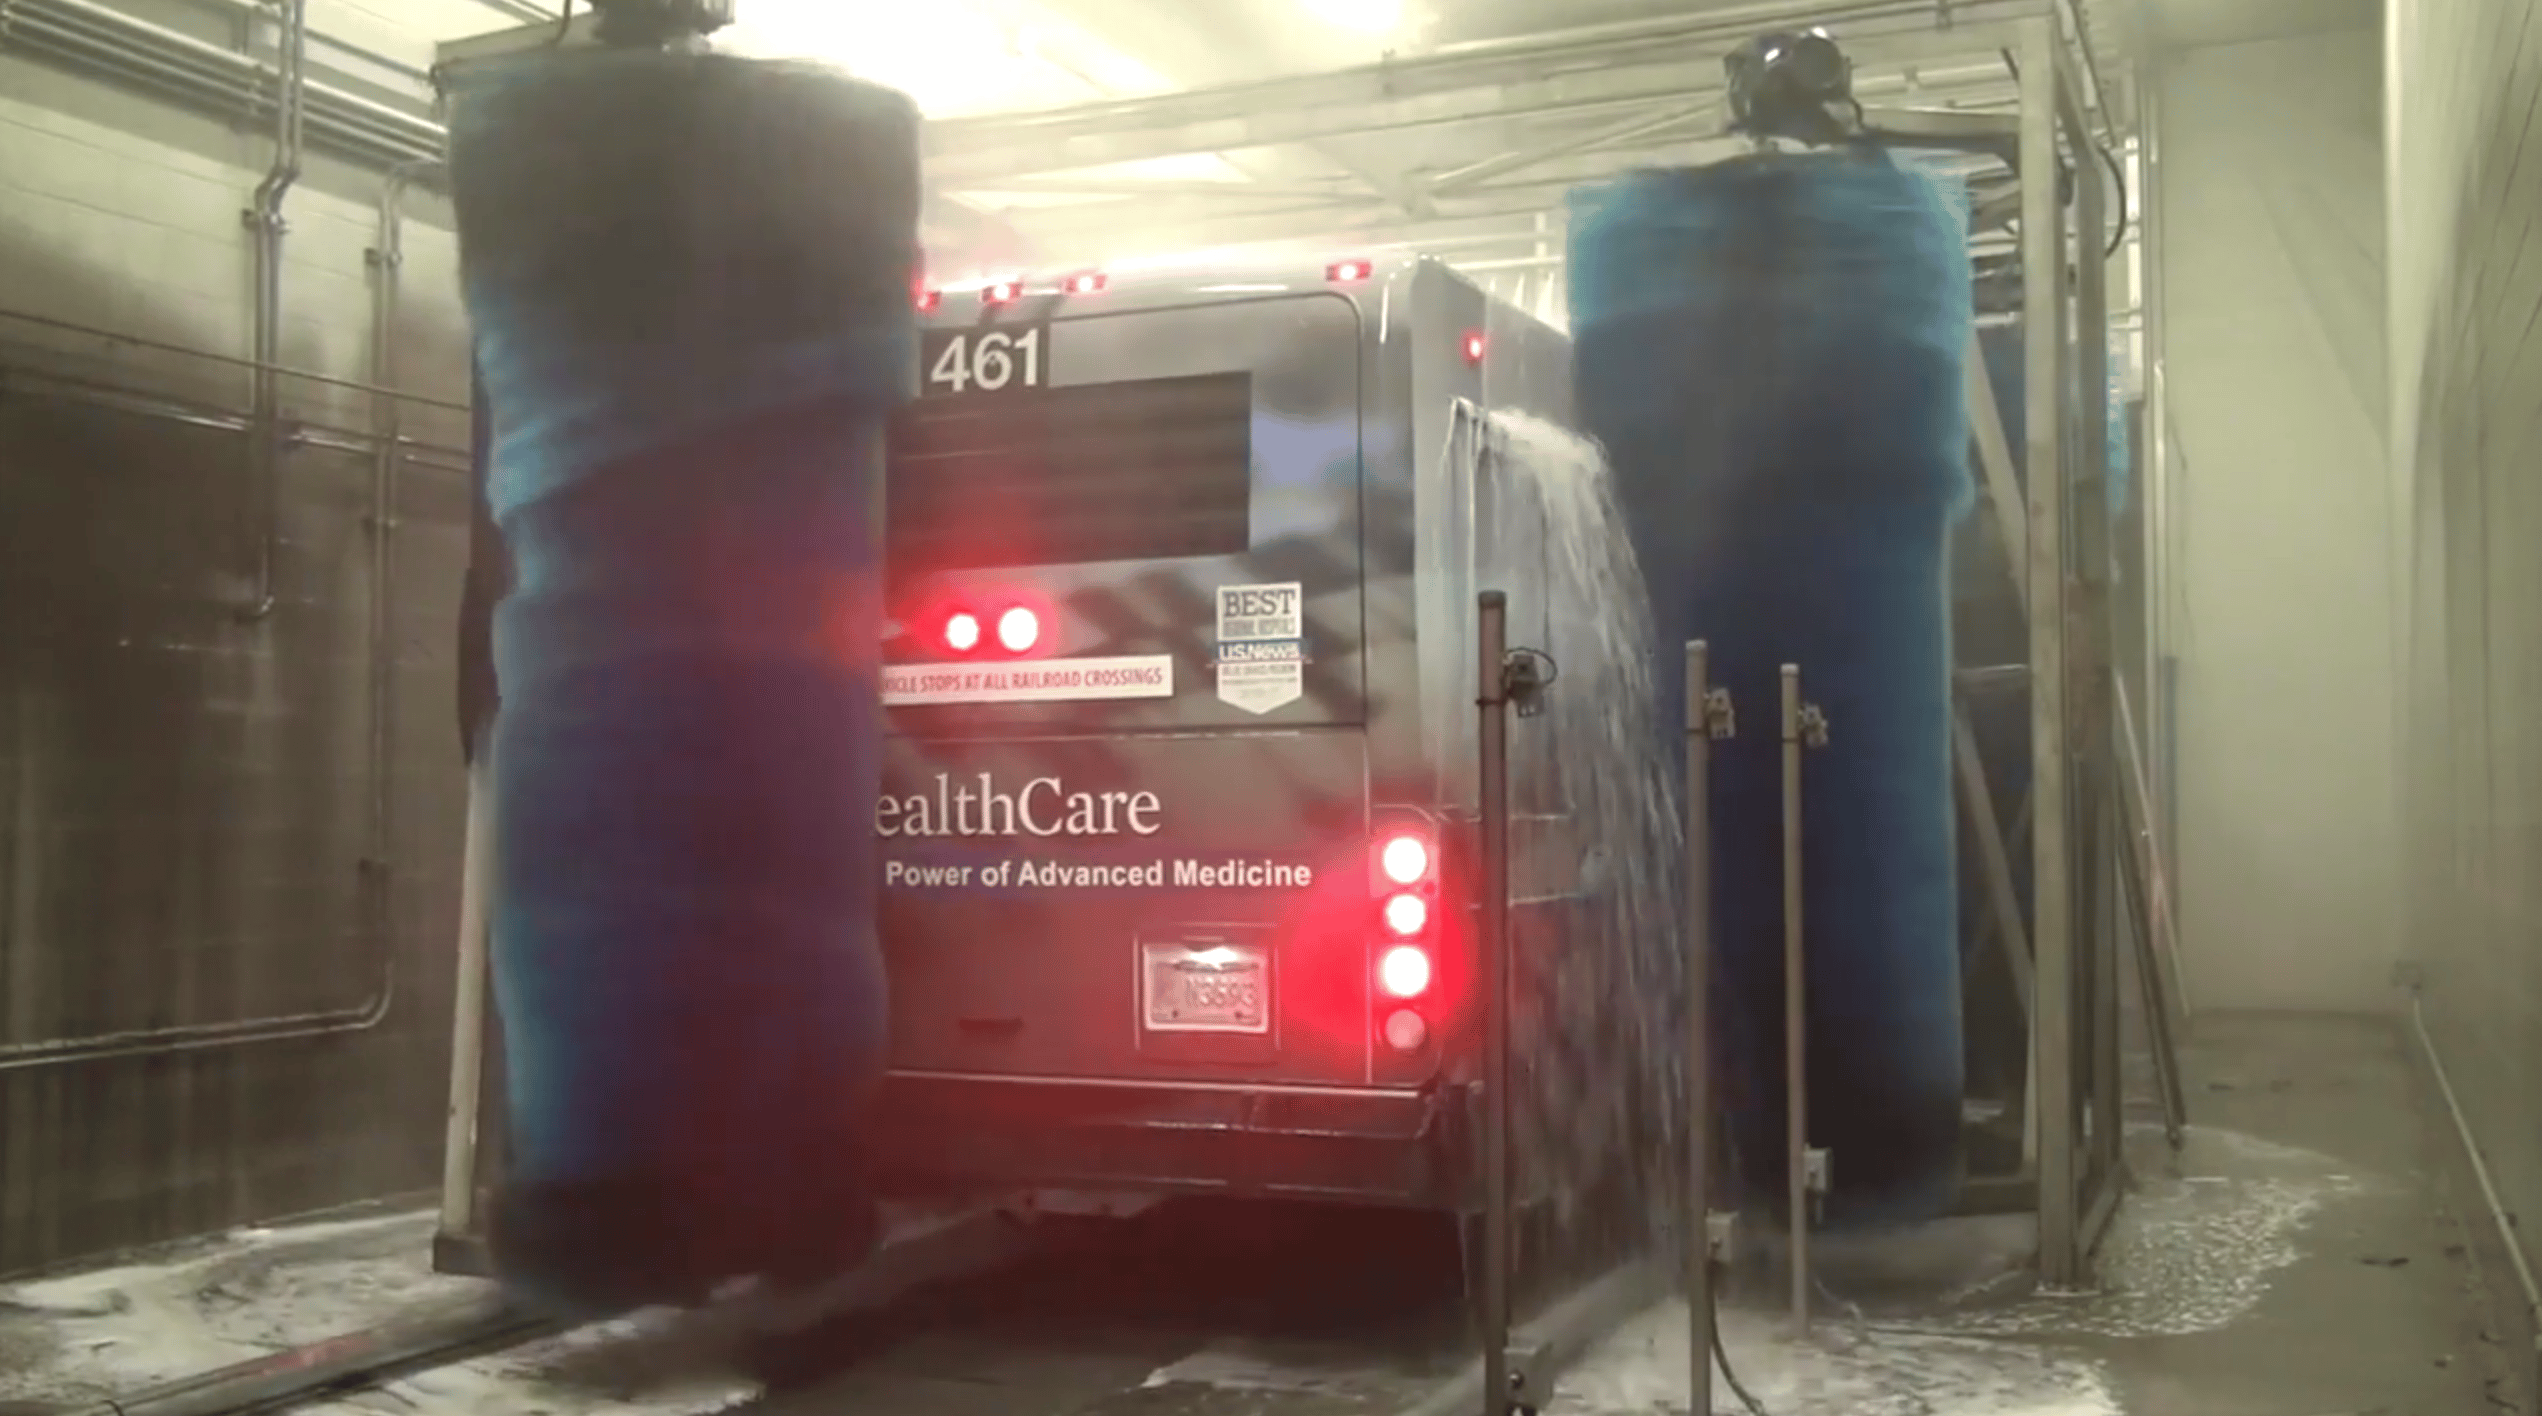 Transit bus wash system in action